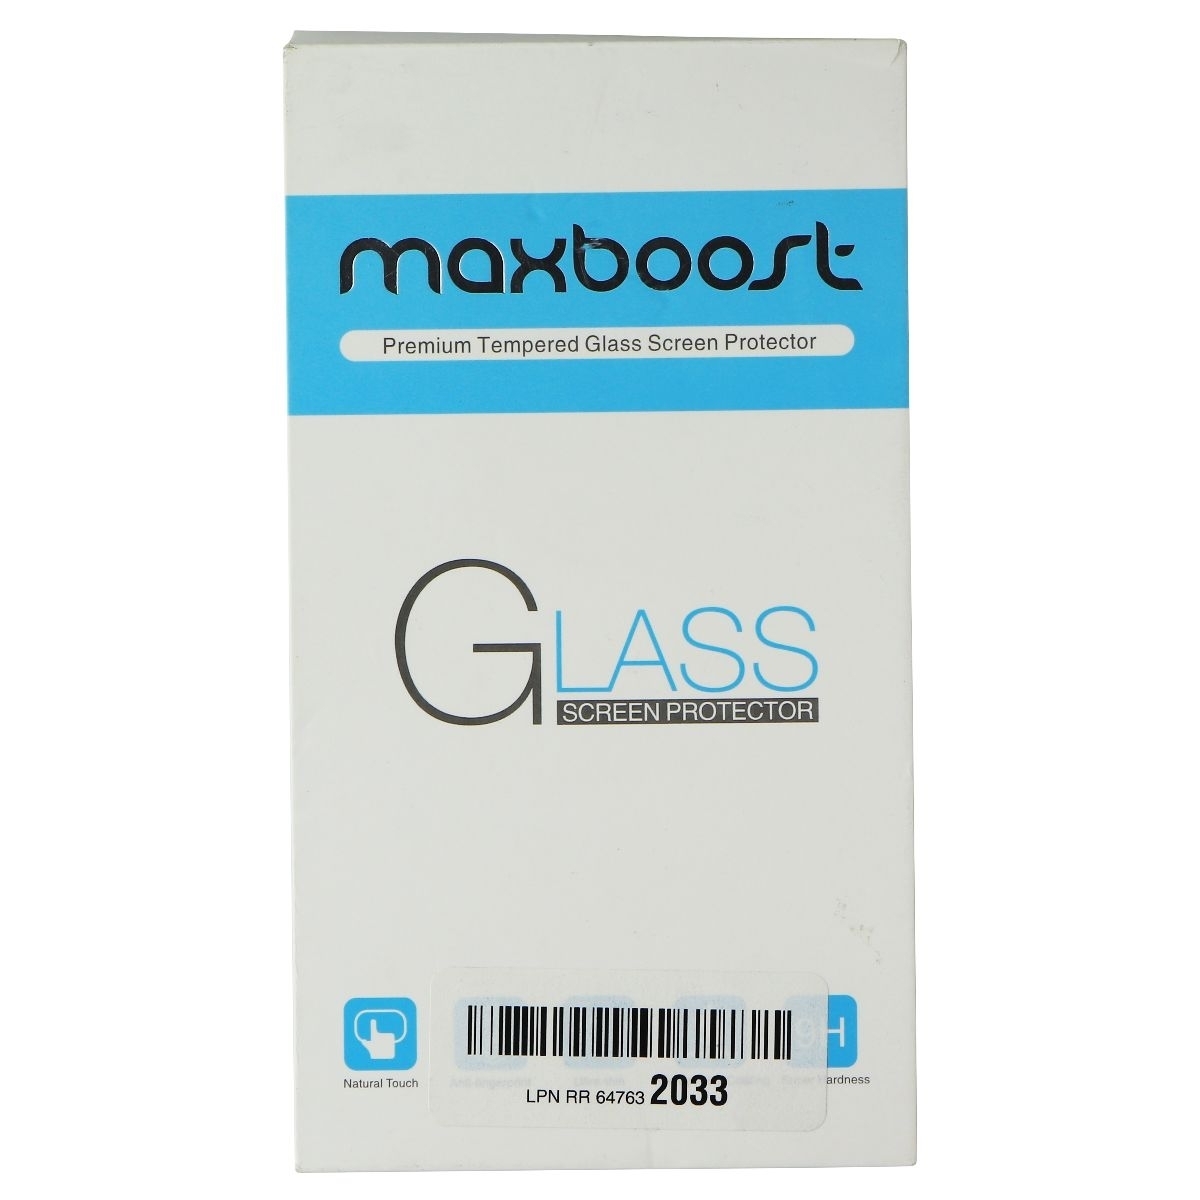 Maxboost Premium Tempered Glass Screen Protector For Apple IPhone XS / X - Clear (Refurbished)